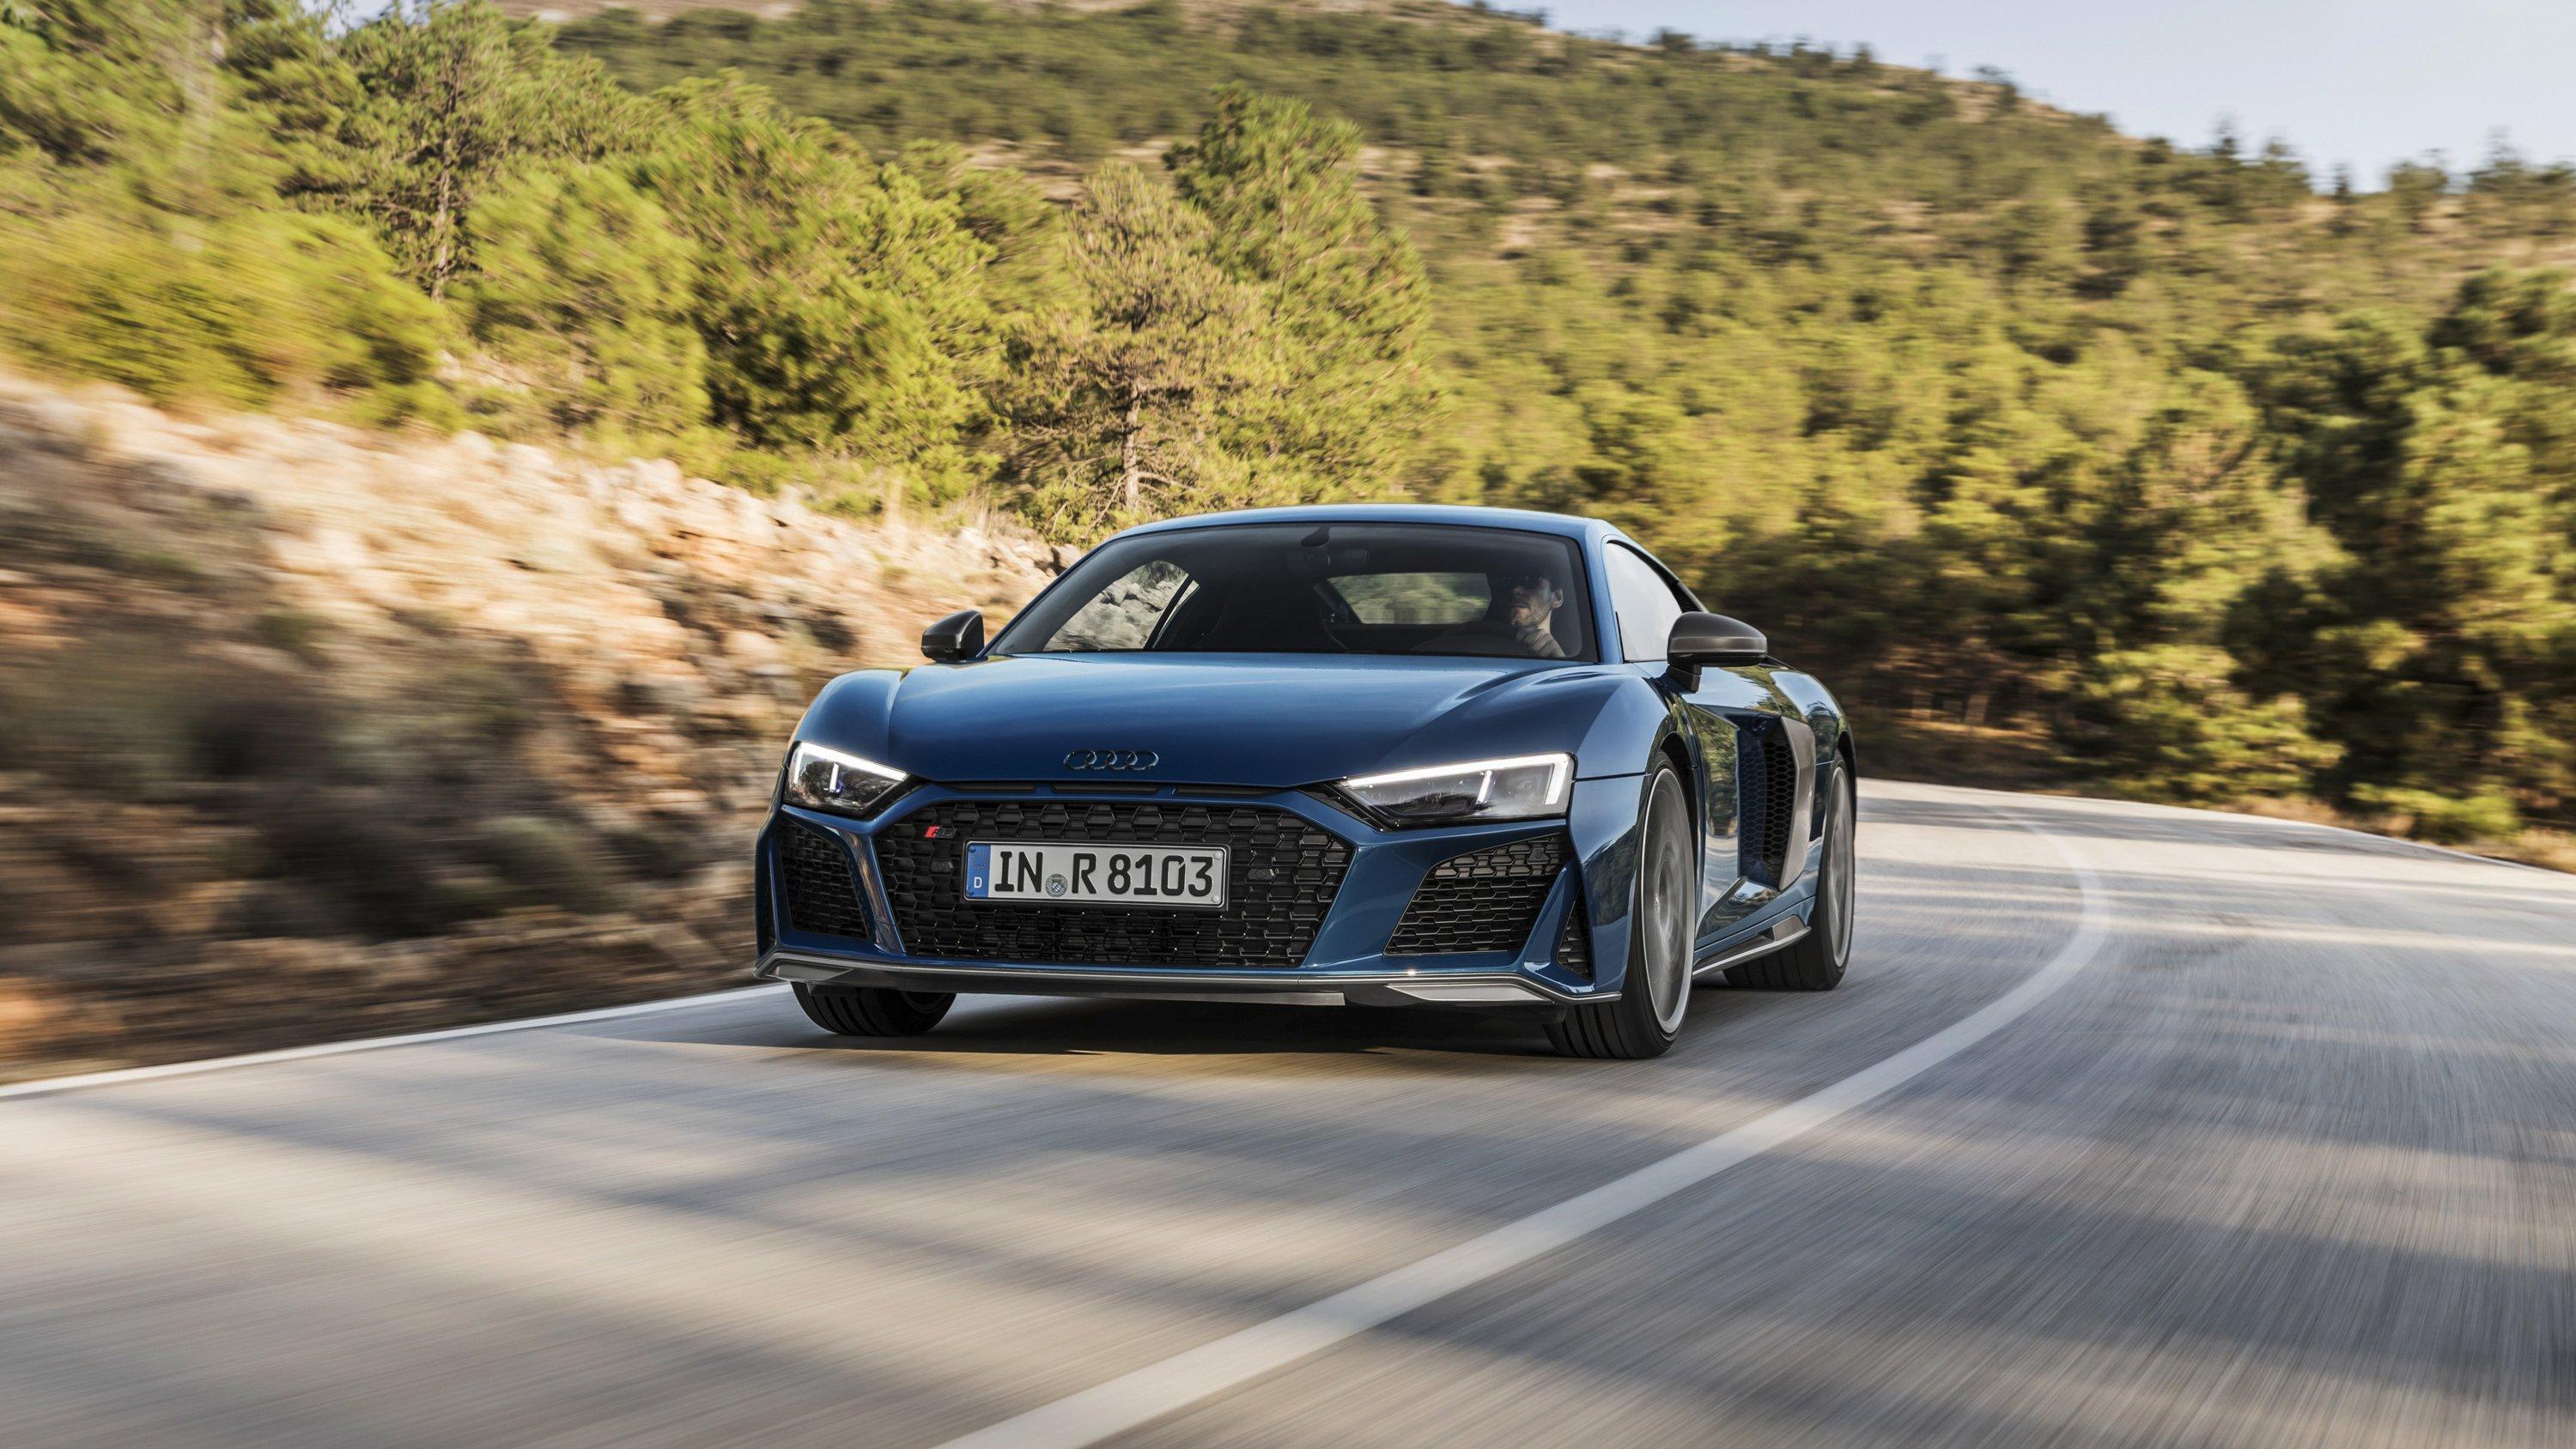 Wallpaper Of The Day: 2019 Audi R8